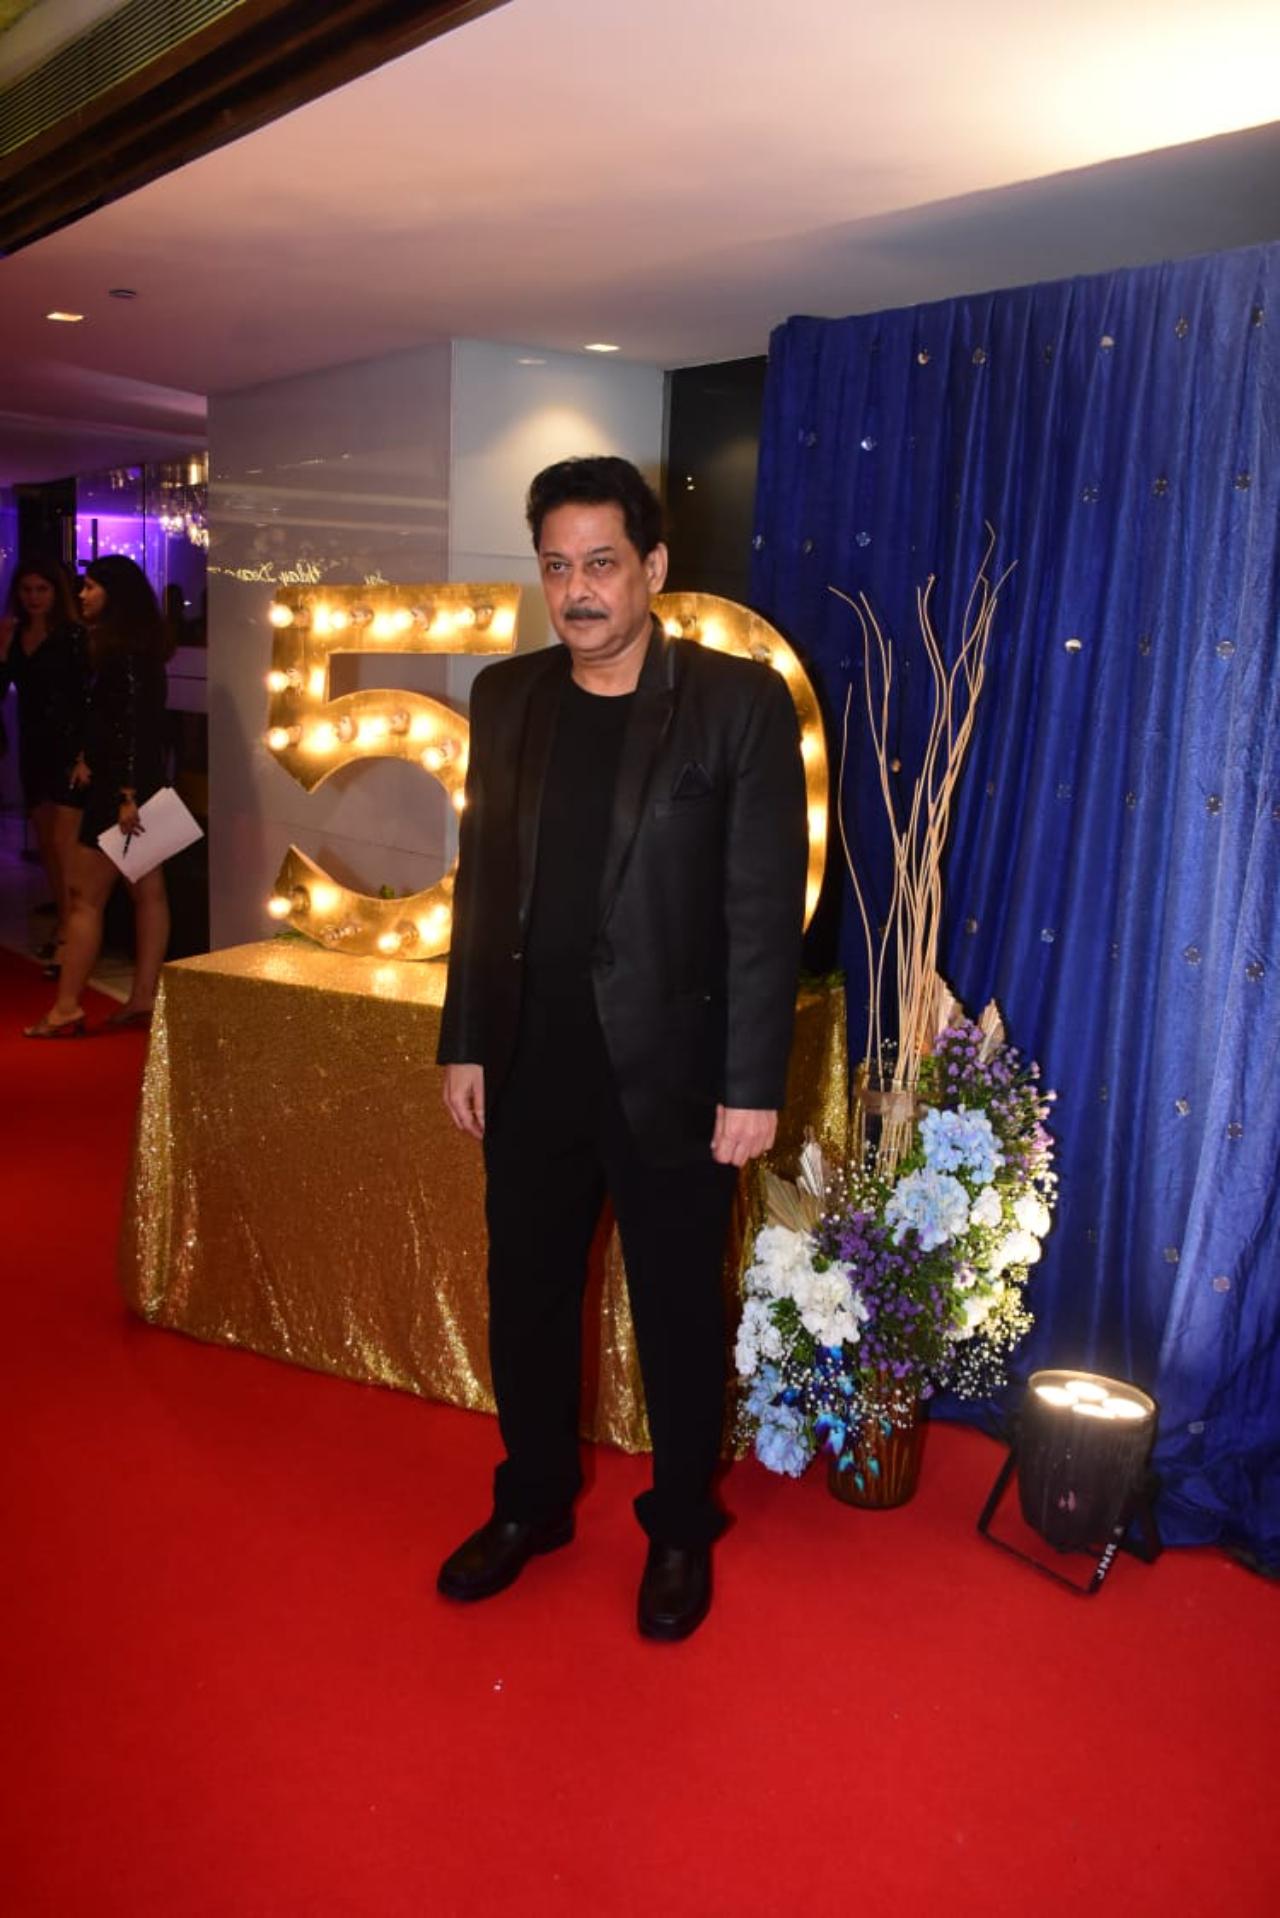 Music director Anand Srivastava of the Anand-Milind duo was also in attendance